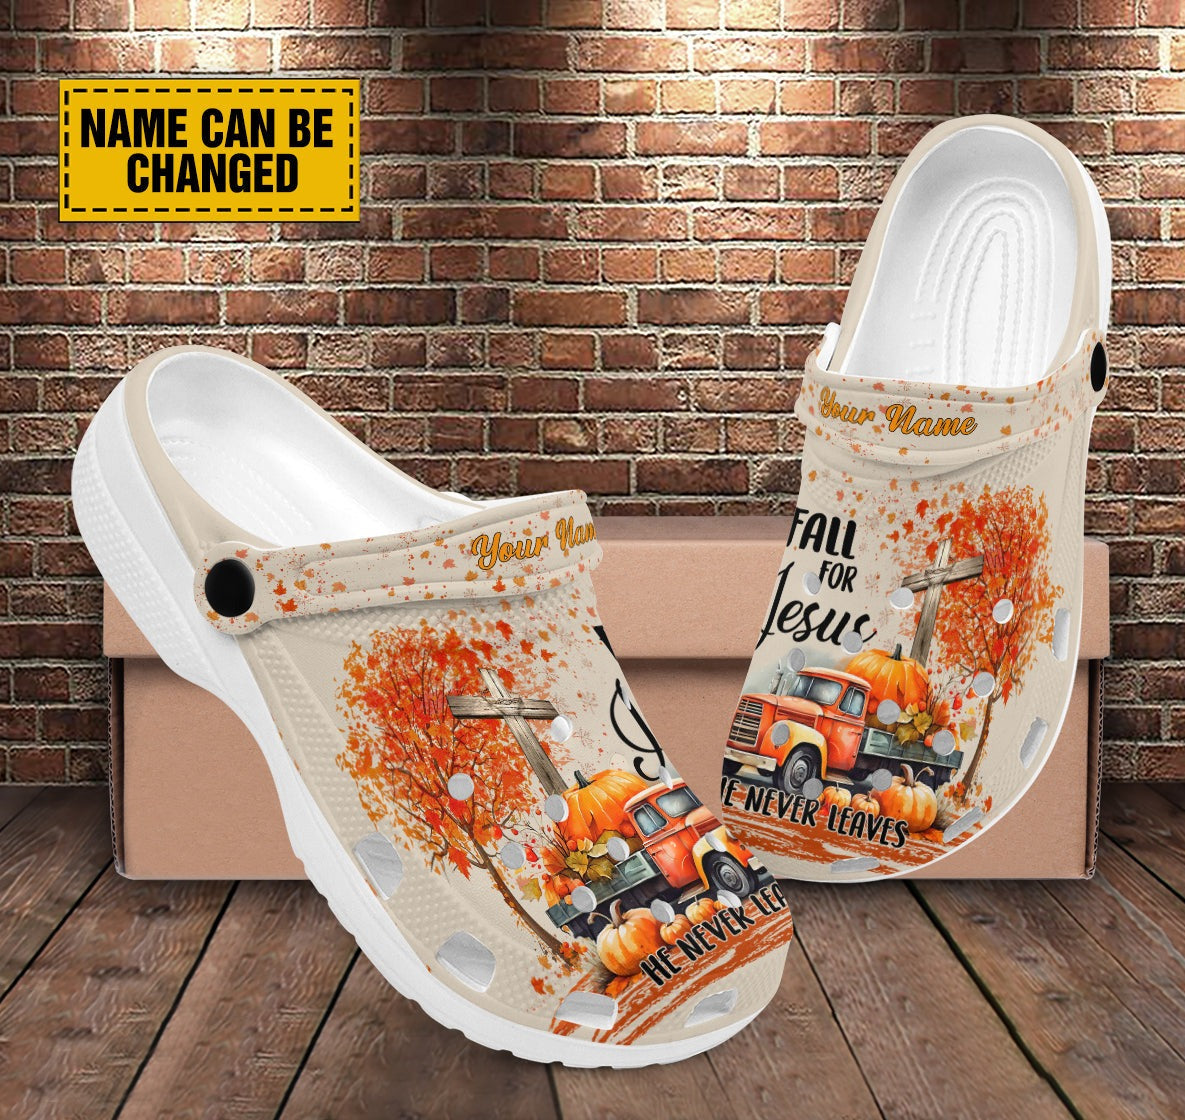 Teesdily | Jesus Thanksgiving Personalized Backstrap Clogs, Fall For Jesus He Never Leaves Clog Shoes, Autumn Pumpkin Car Kid & Adult Eva Clogs